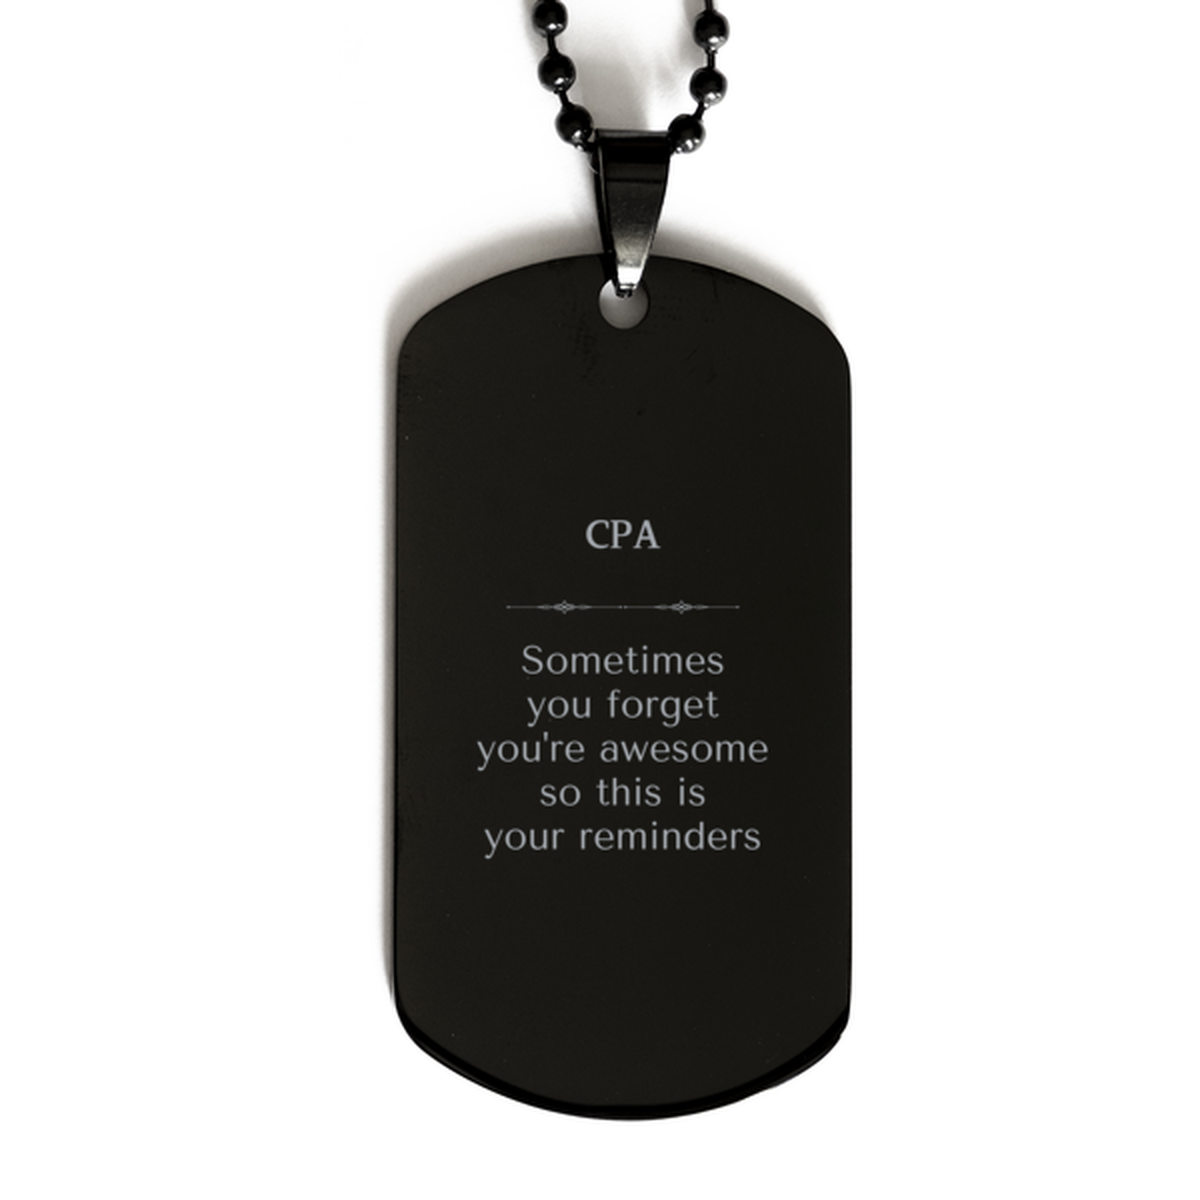 Sentimental CPA Black Dog Tag, CPA Sometimes you forget you're awesome so this is your reminders, Graduation Christmas Birthday Gifts for CPA, Men, Women, Coworkers